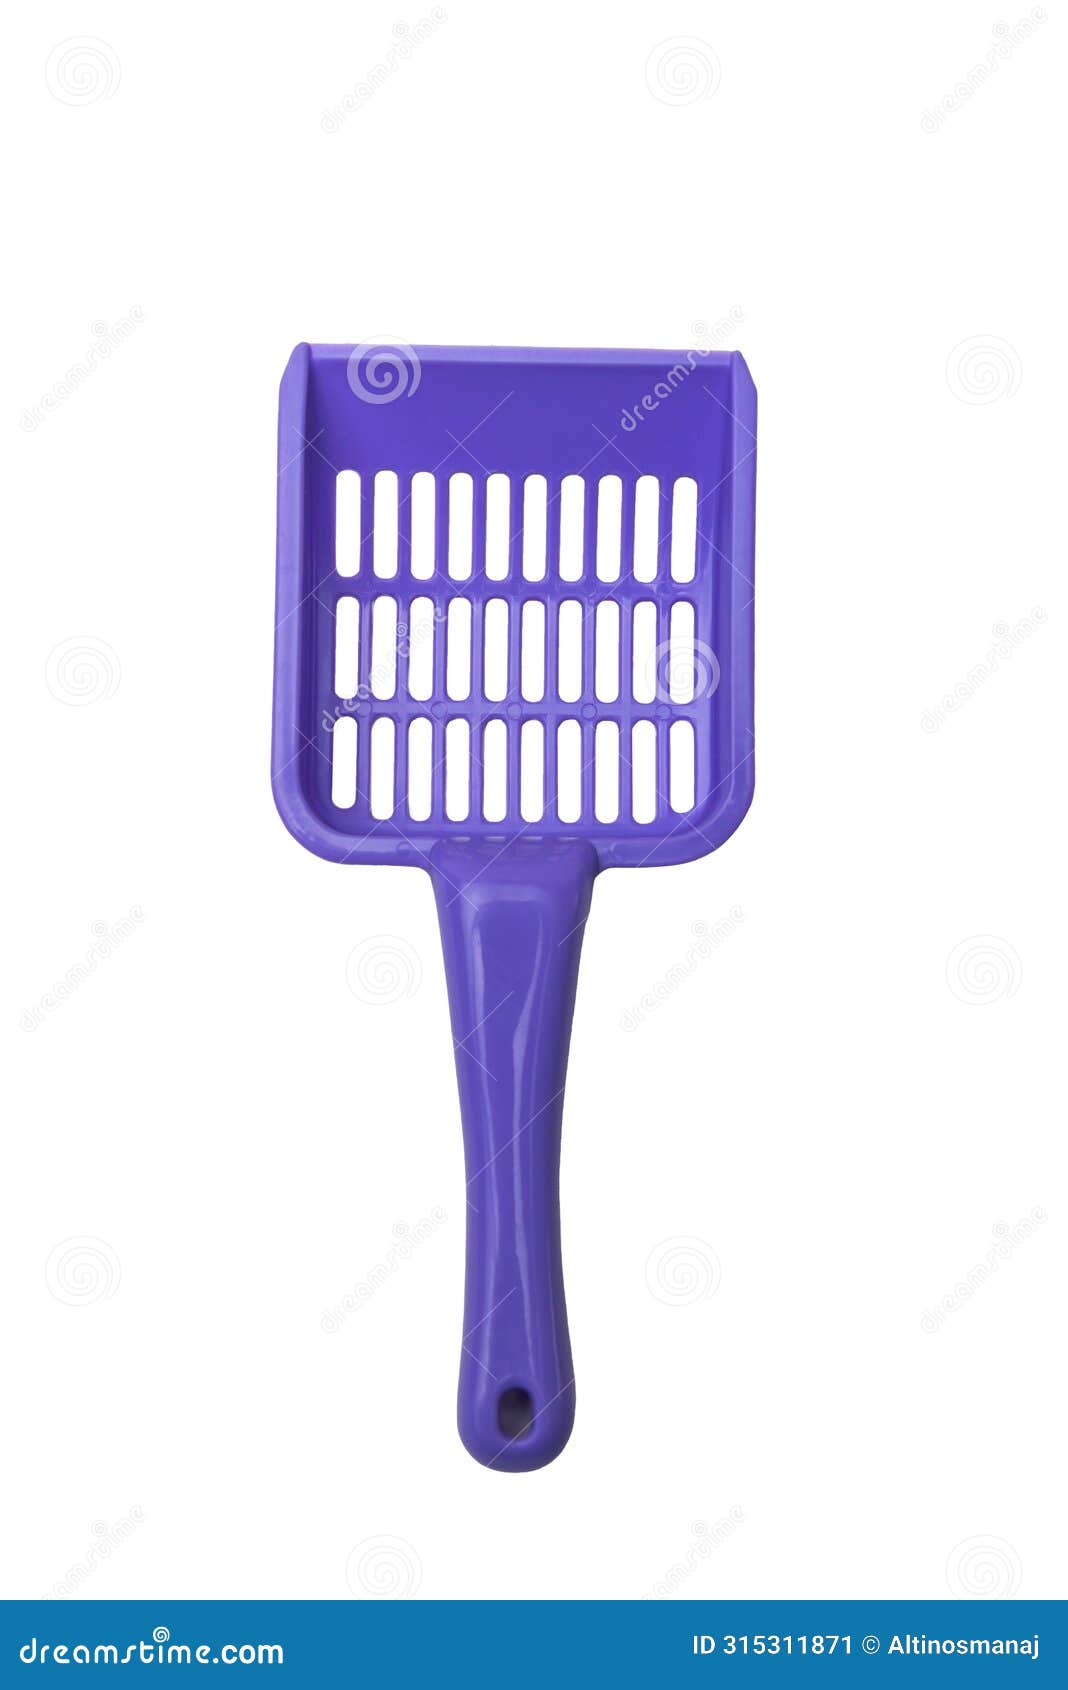 cat litter scoop plastic equipment shovel cleaning dung waste sanitary